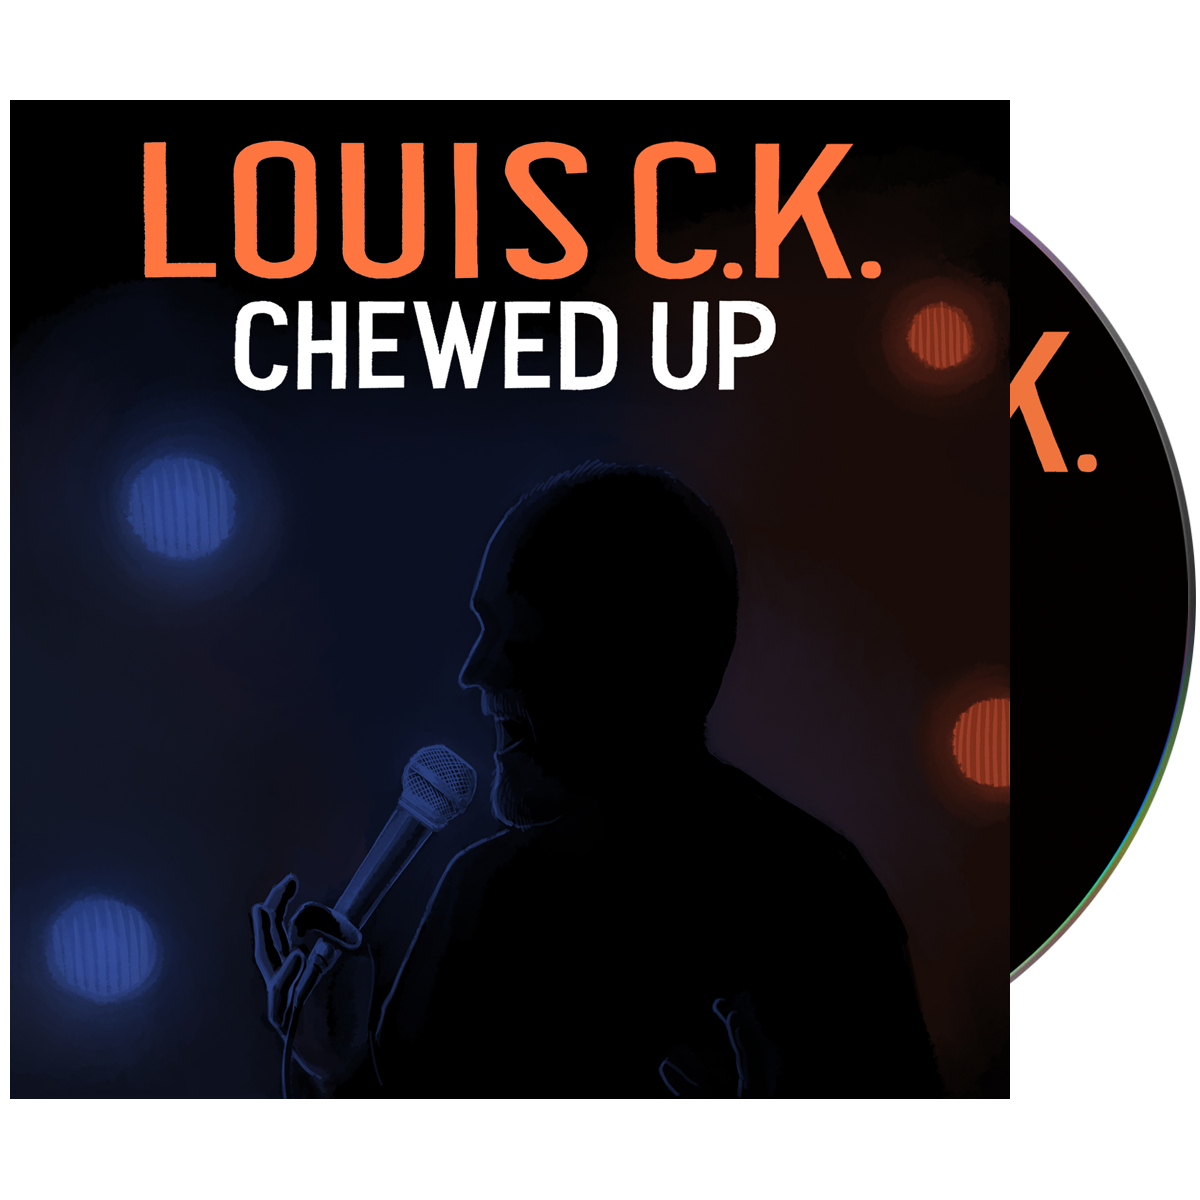 DVD Review: Louis C.K.'s 'Chewed Up' + March 27th Appearance @ The Wiltern